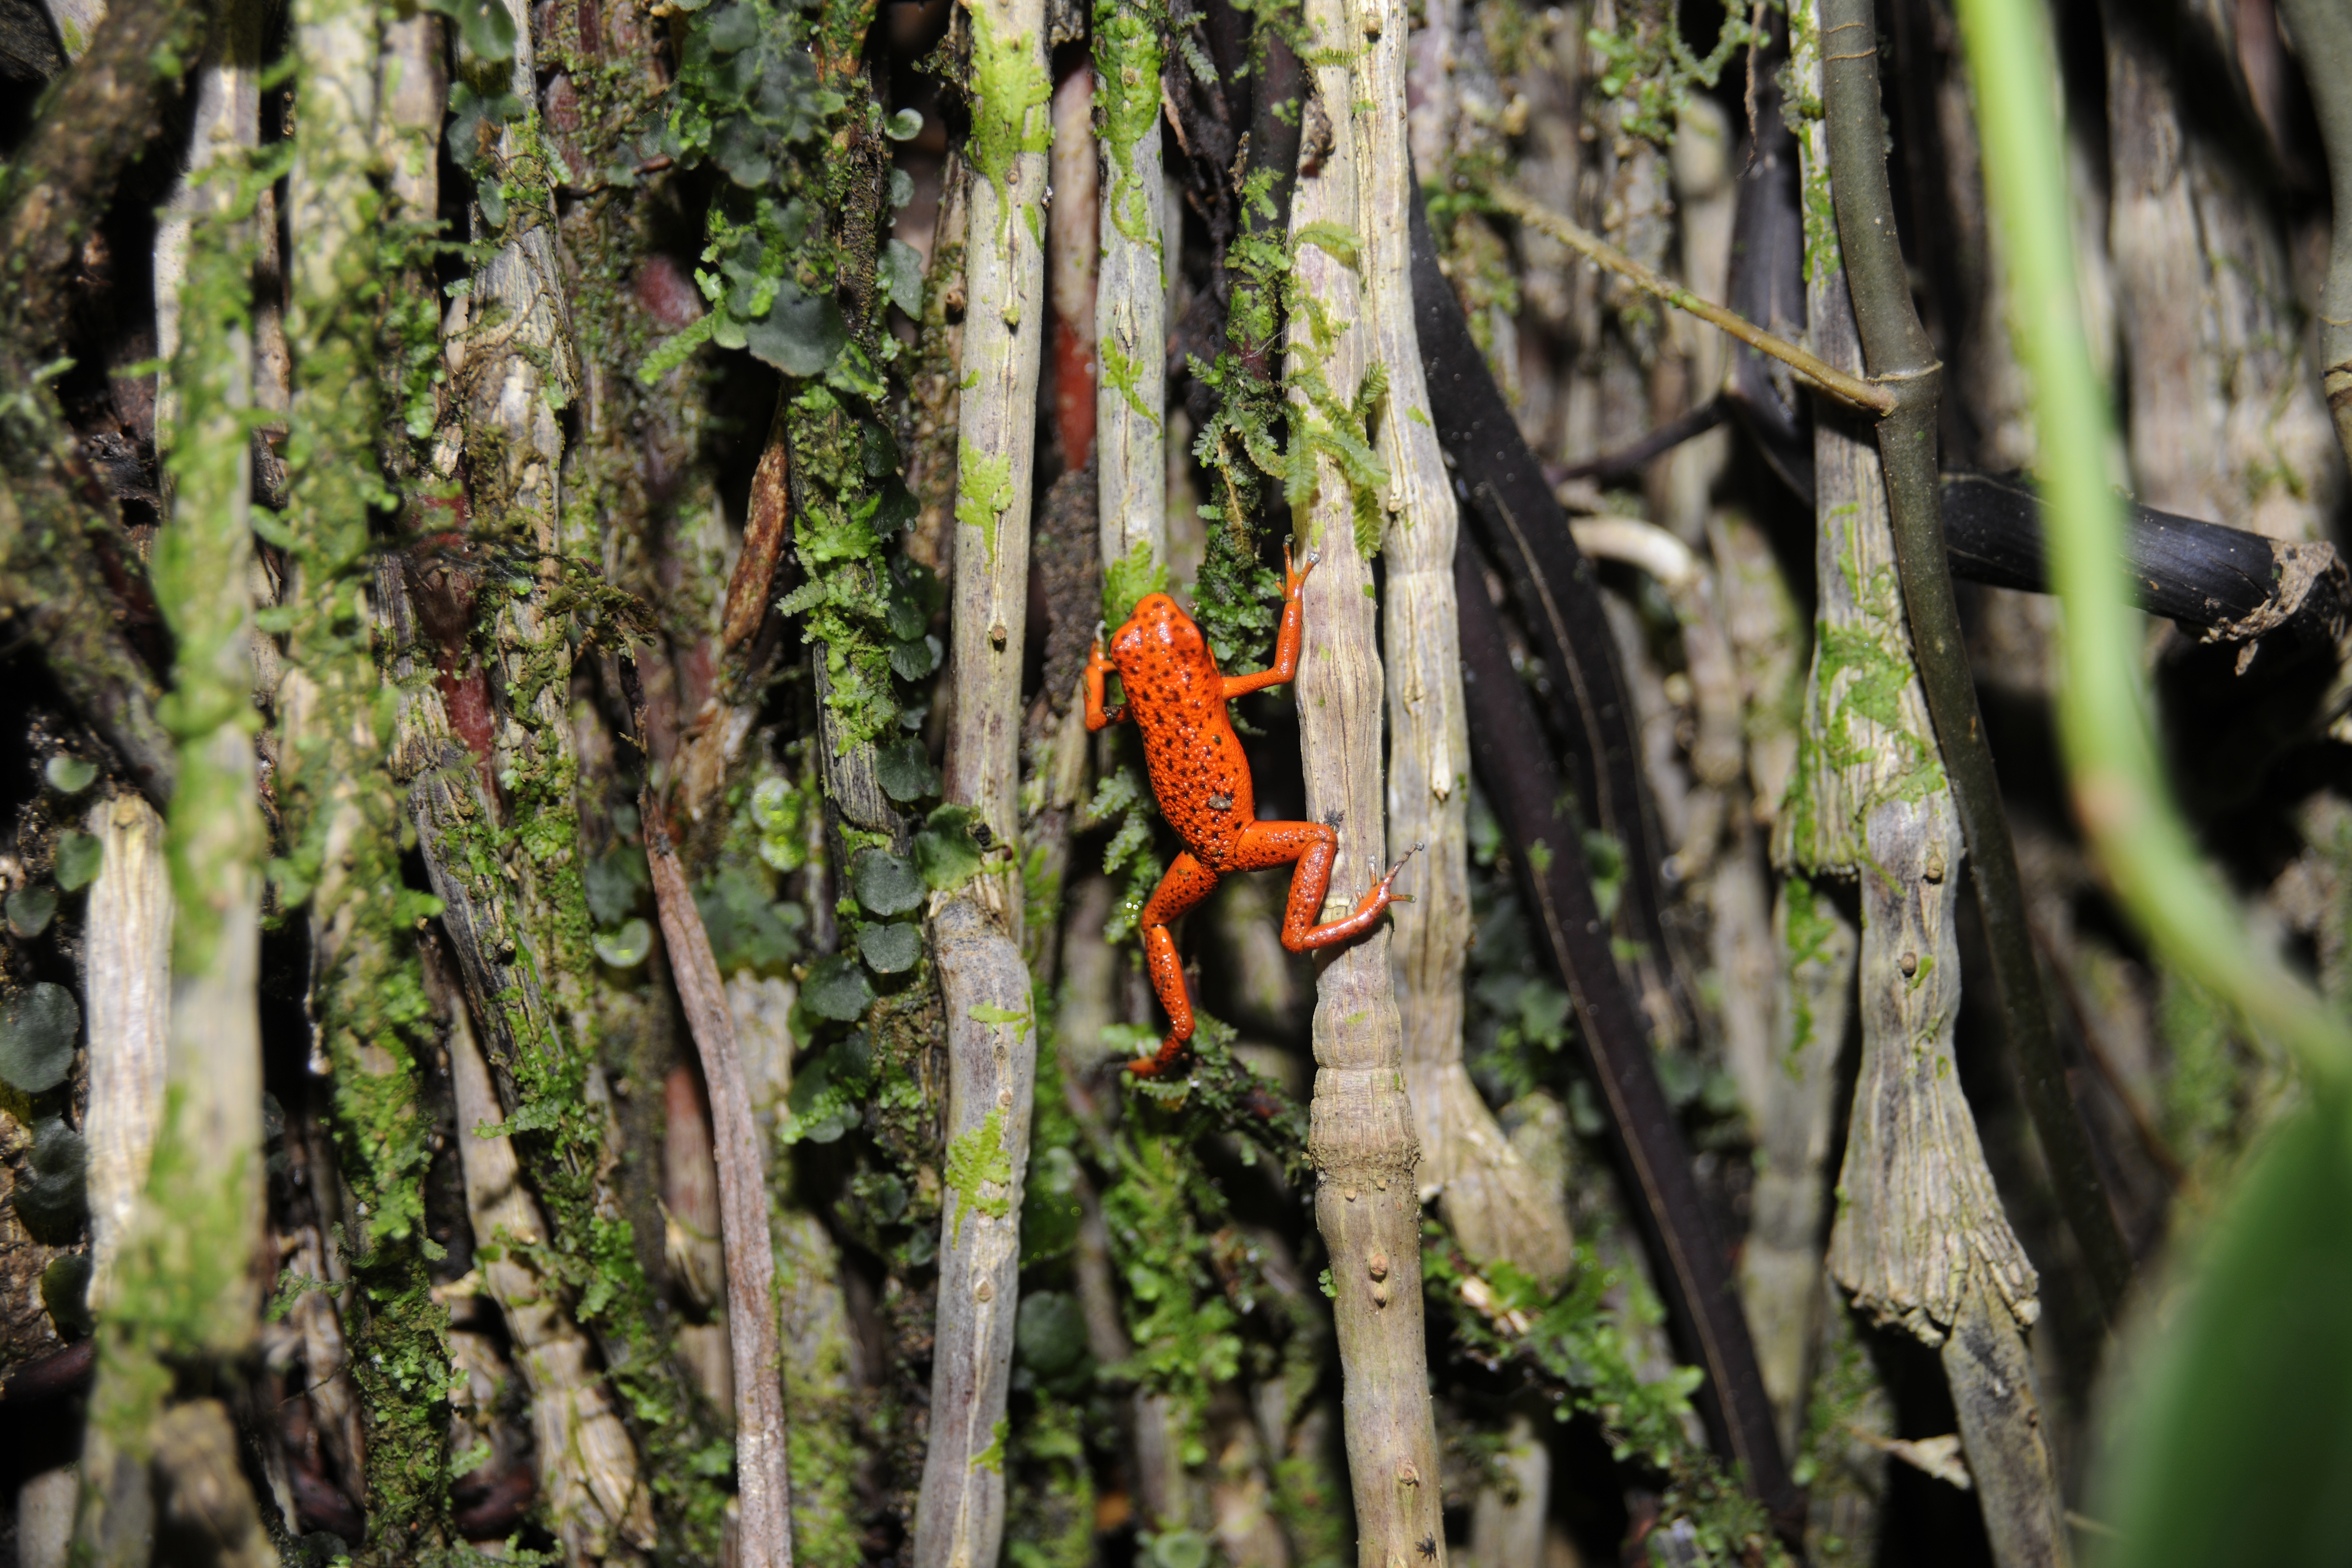 Bright red frog climbing branches.